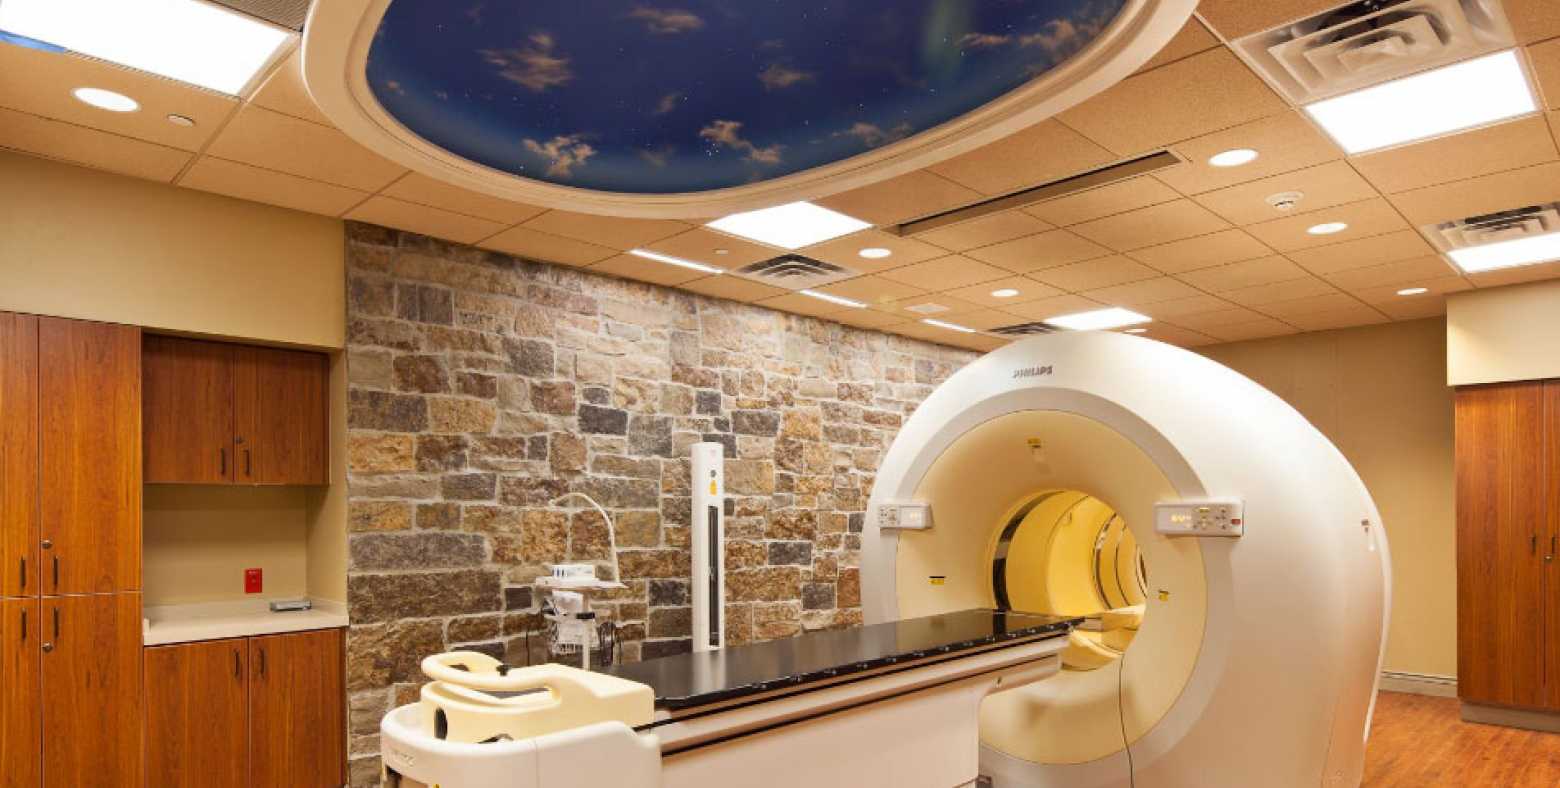 PET/CT device at the Tahoe Forest Cancer Center